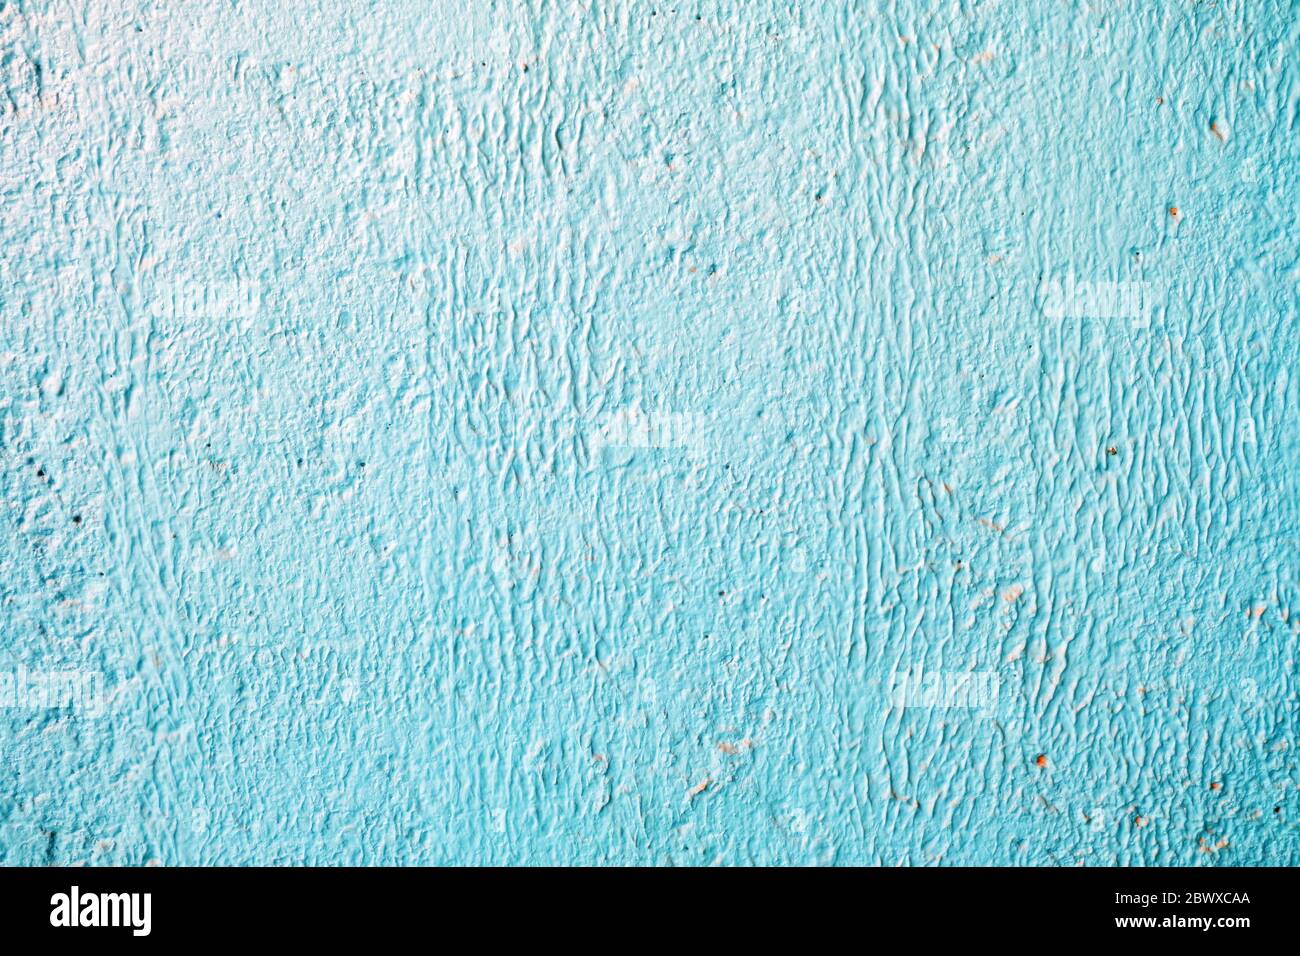 Blue Plaster Stucco Wall Texture Background. Stock Photo